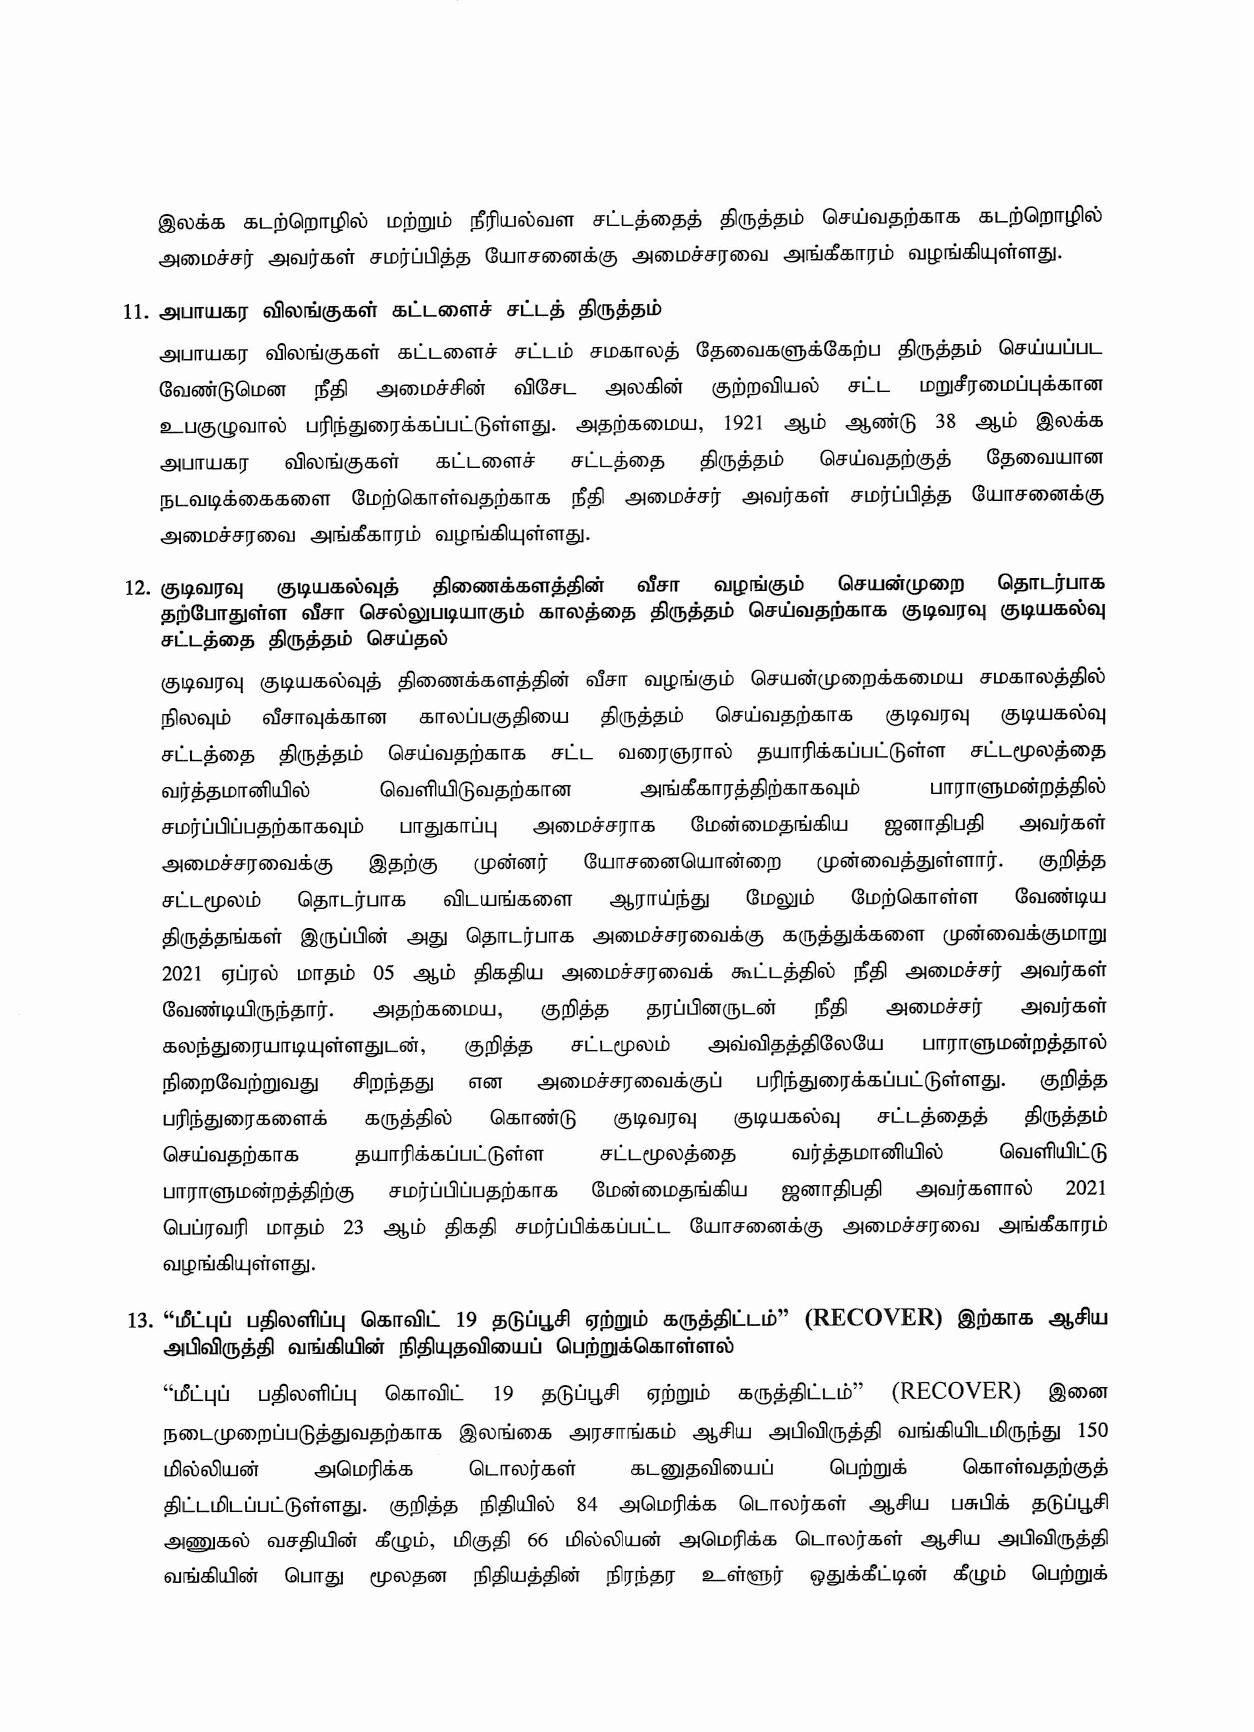 Cabinet Decision on 28.06.2021 Tamil page 006